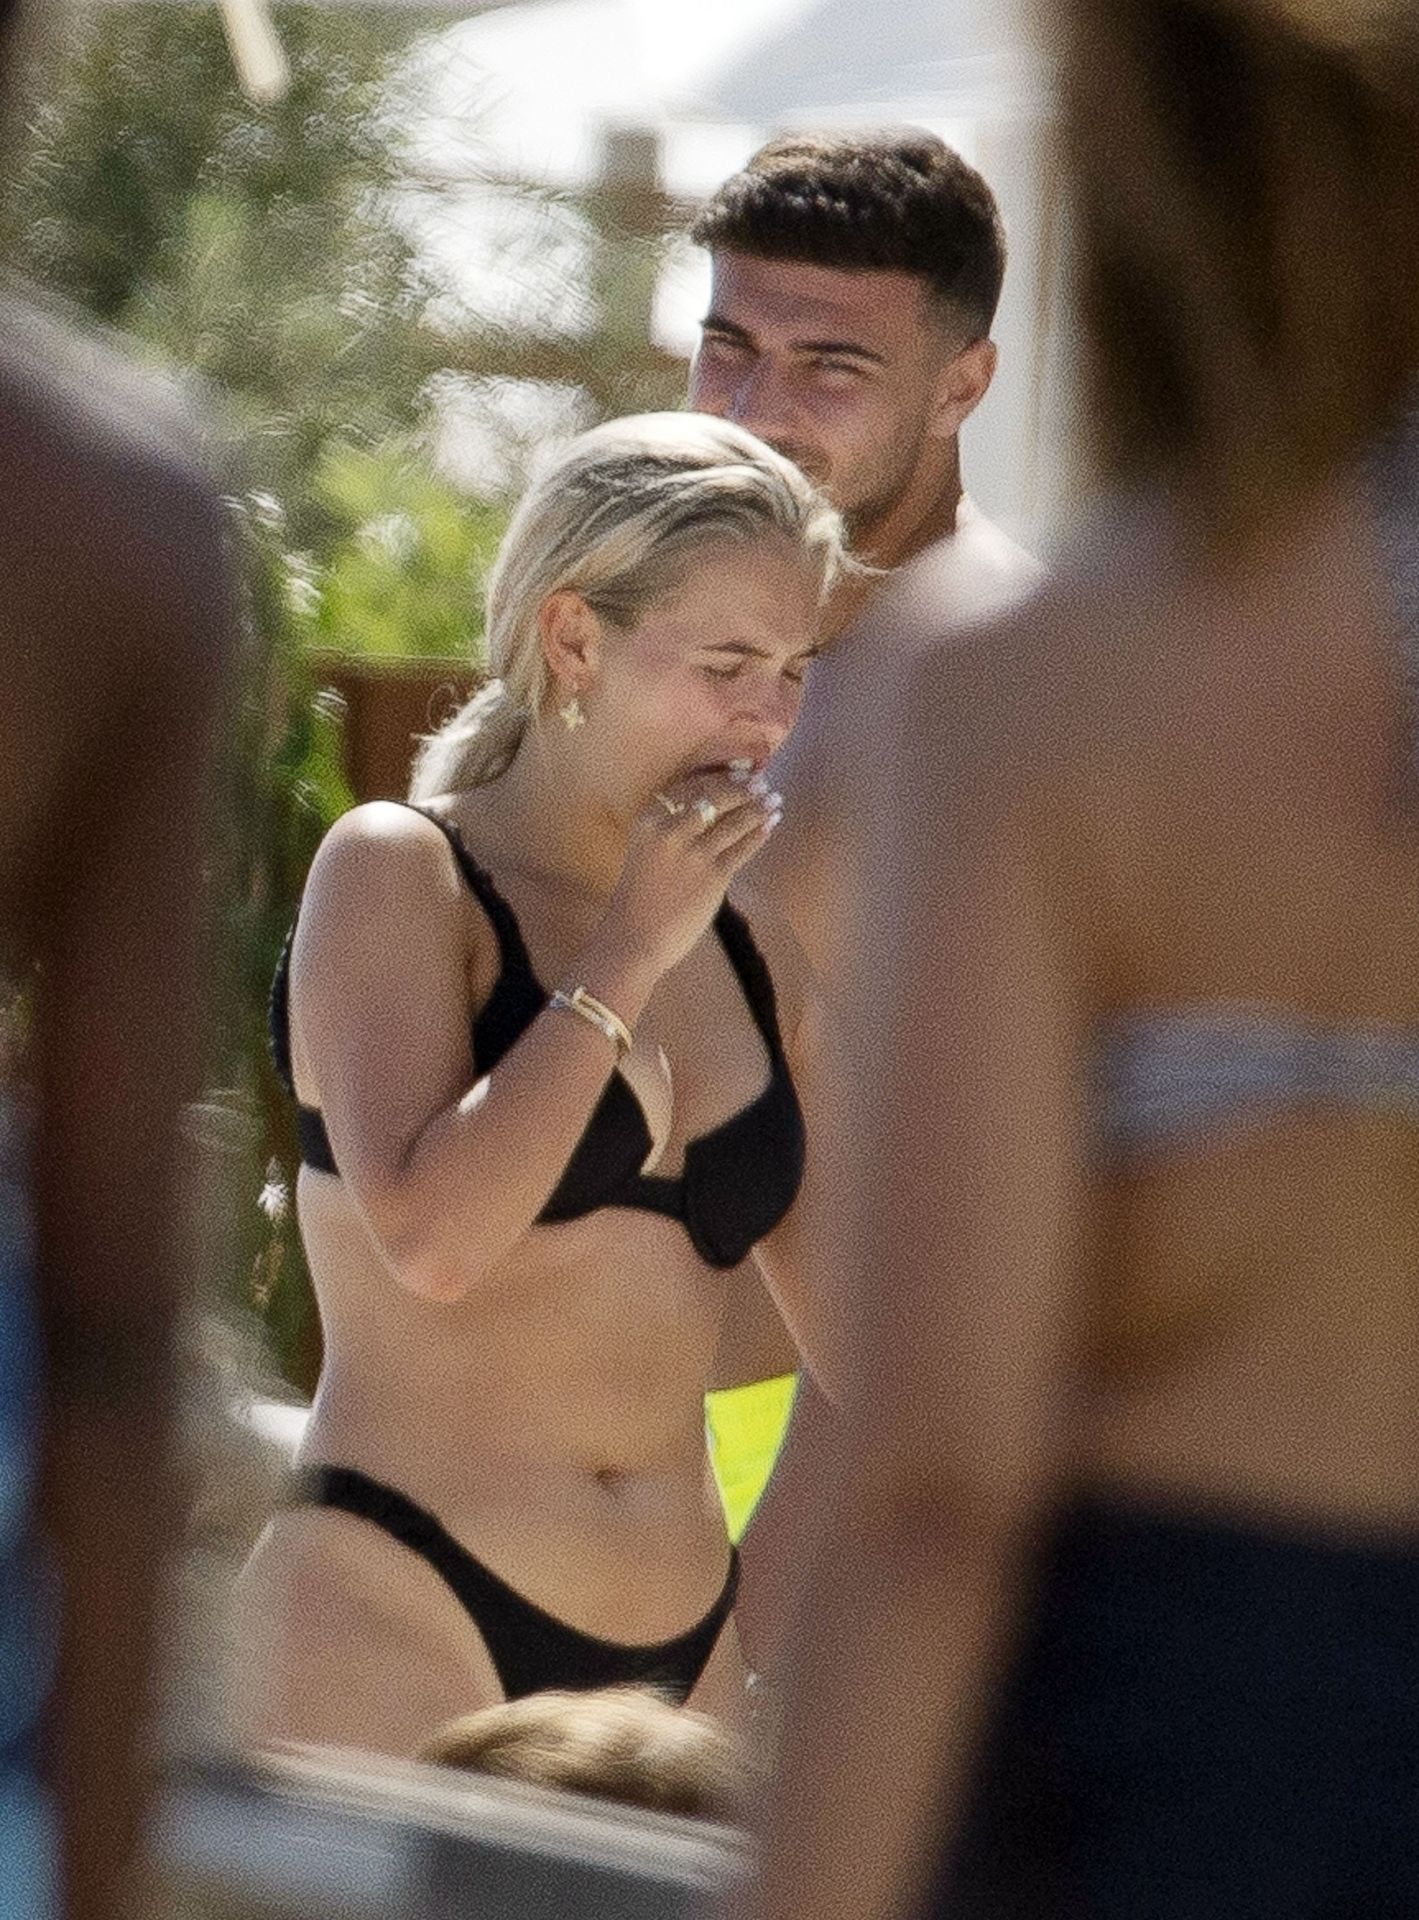 Molly-Mae Hague & Tommy Fury are Pictured Packing on the PDA in Ib
iza (25 Photos)